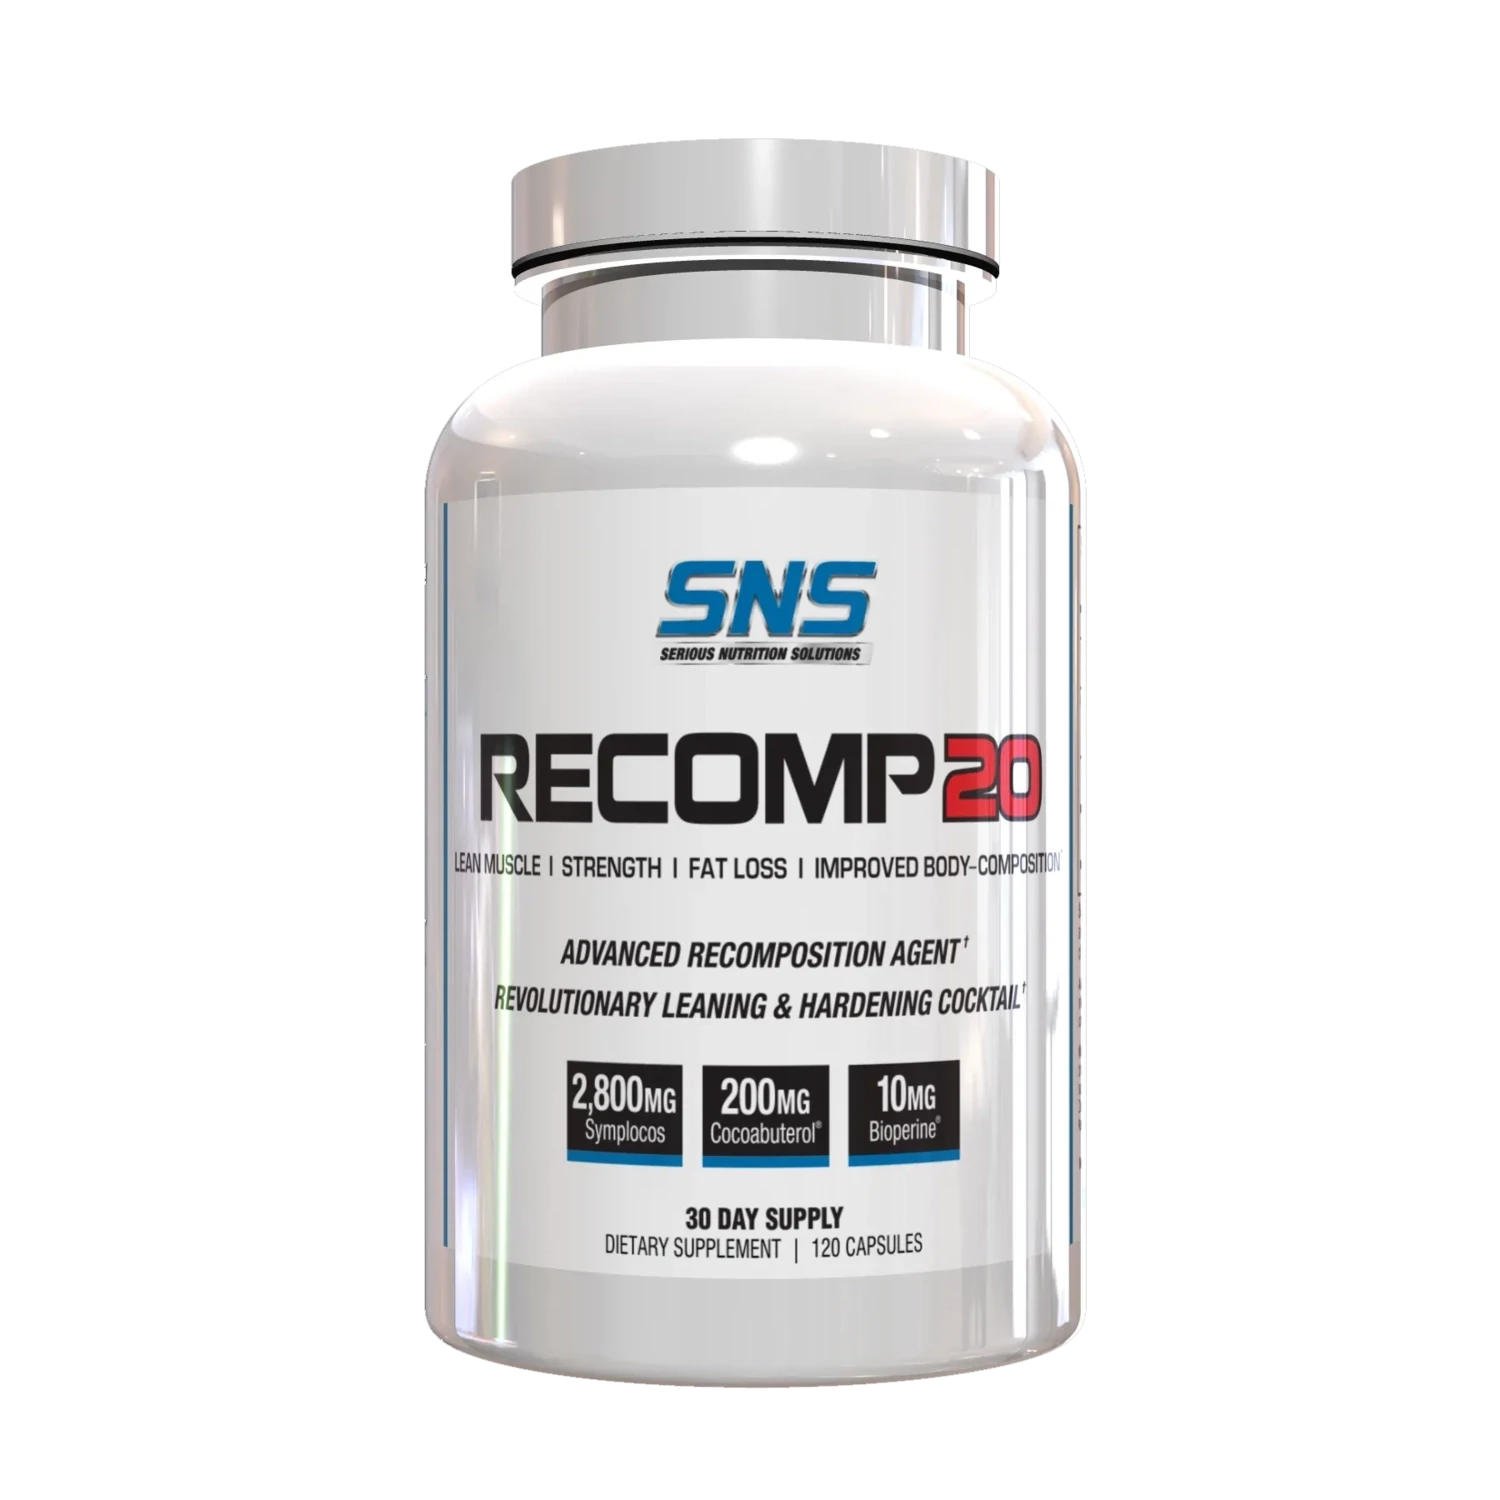 Serious Nutrition Solutions Recomp20